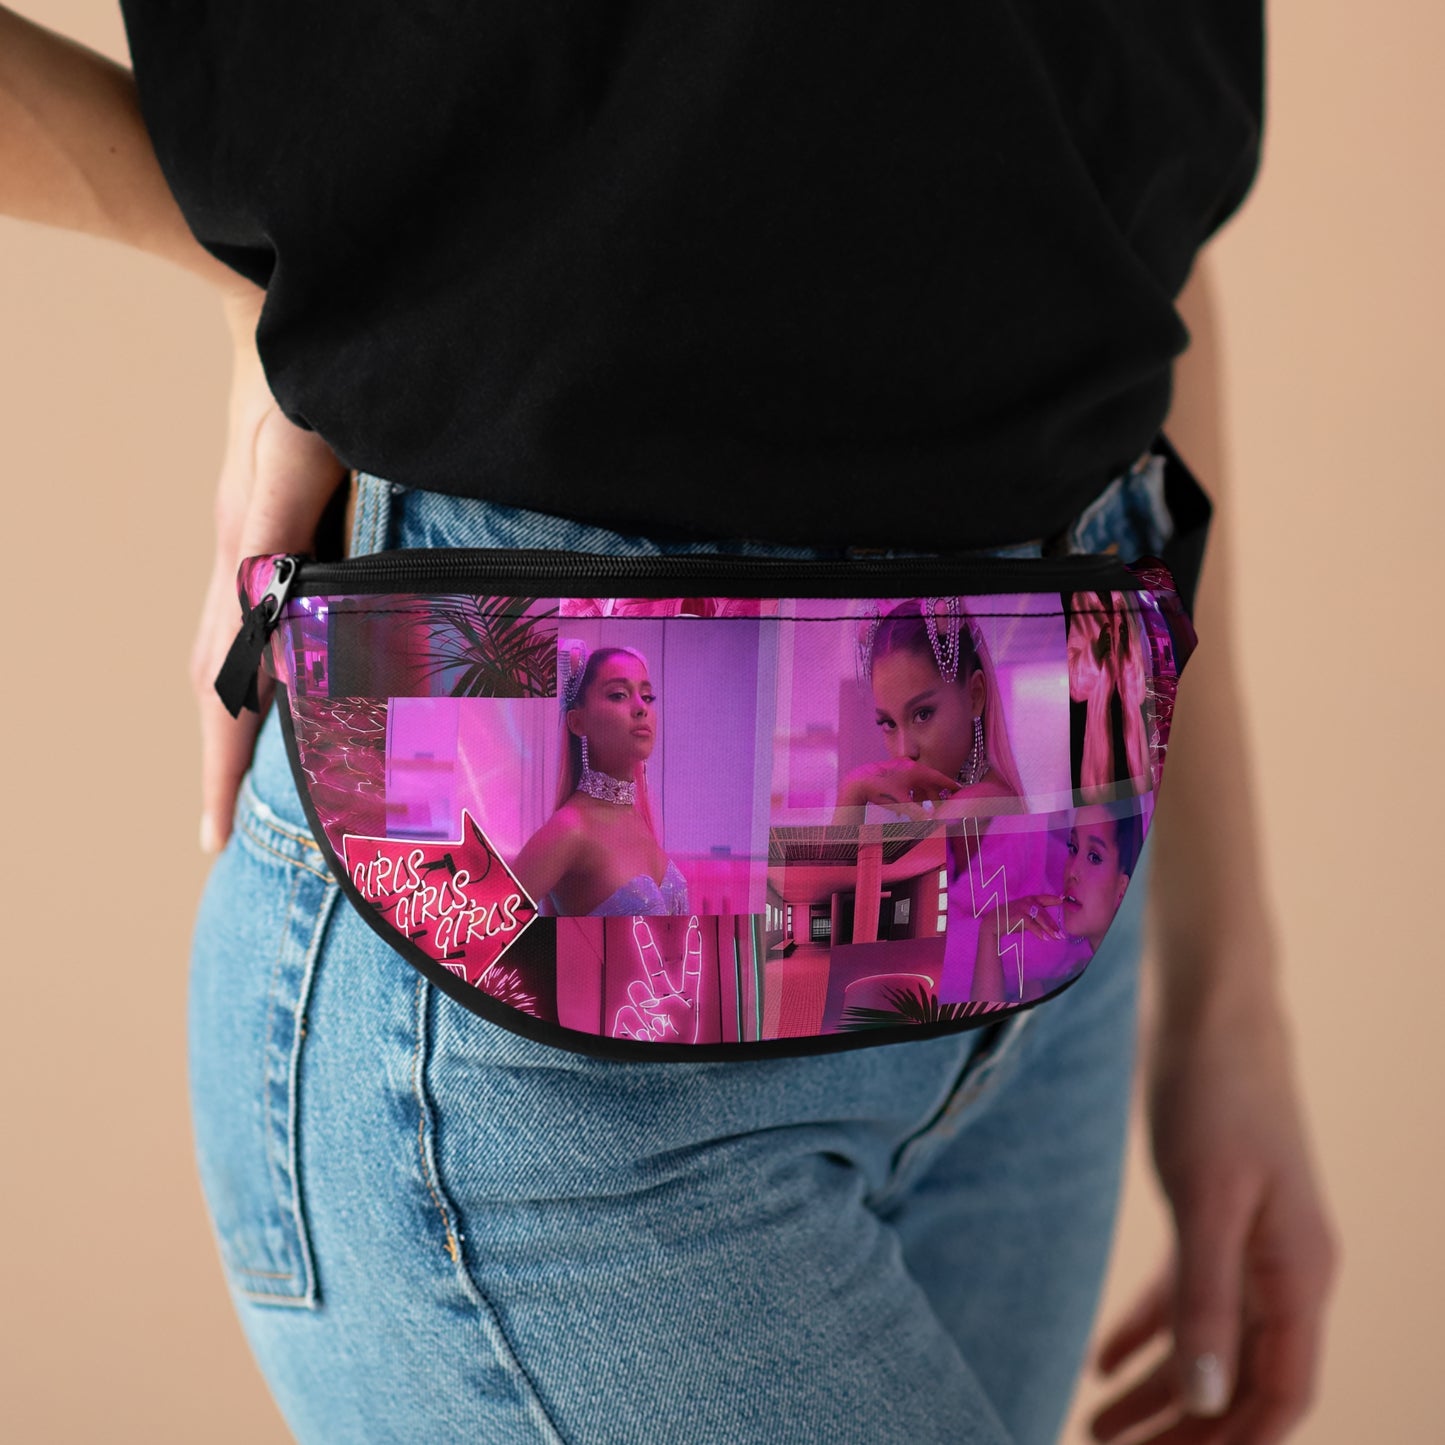 Ariana Grande 7 Rings Collage Fanny Pack